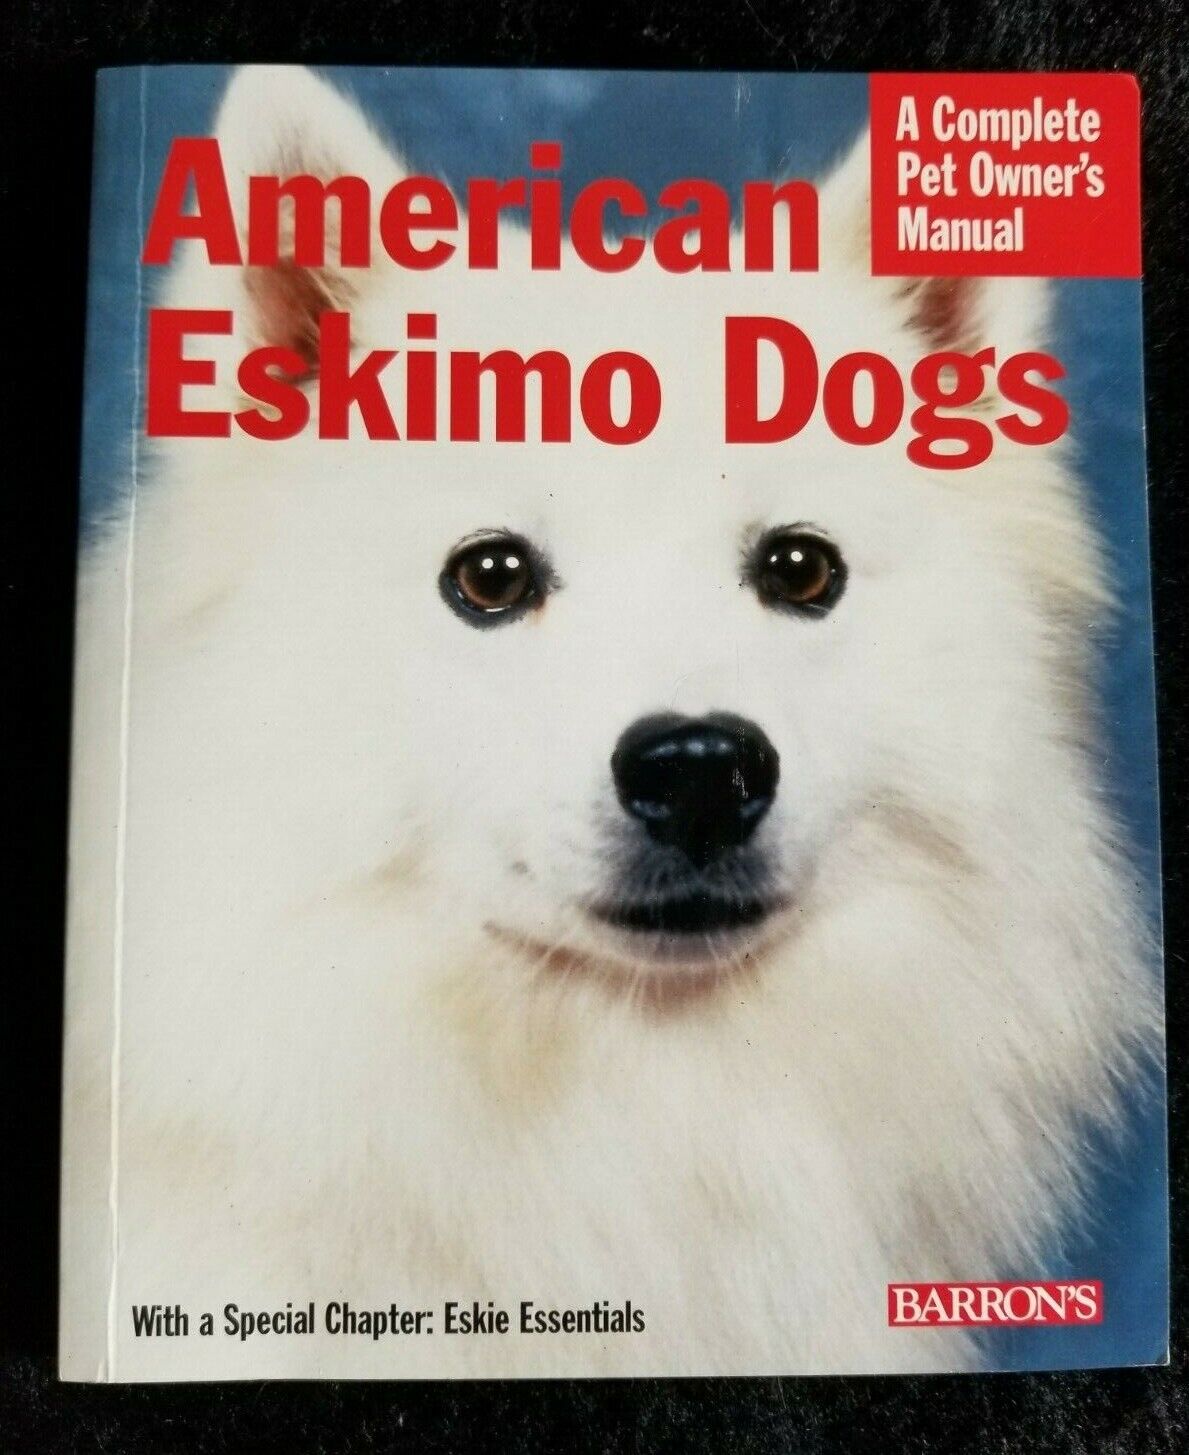 American Eskimo Dogs Complete Pet Owner's Manual